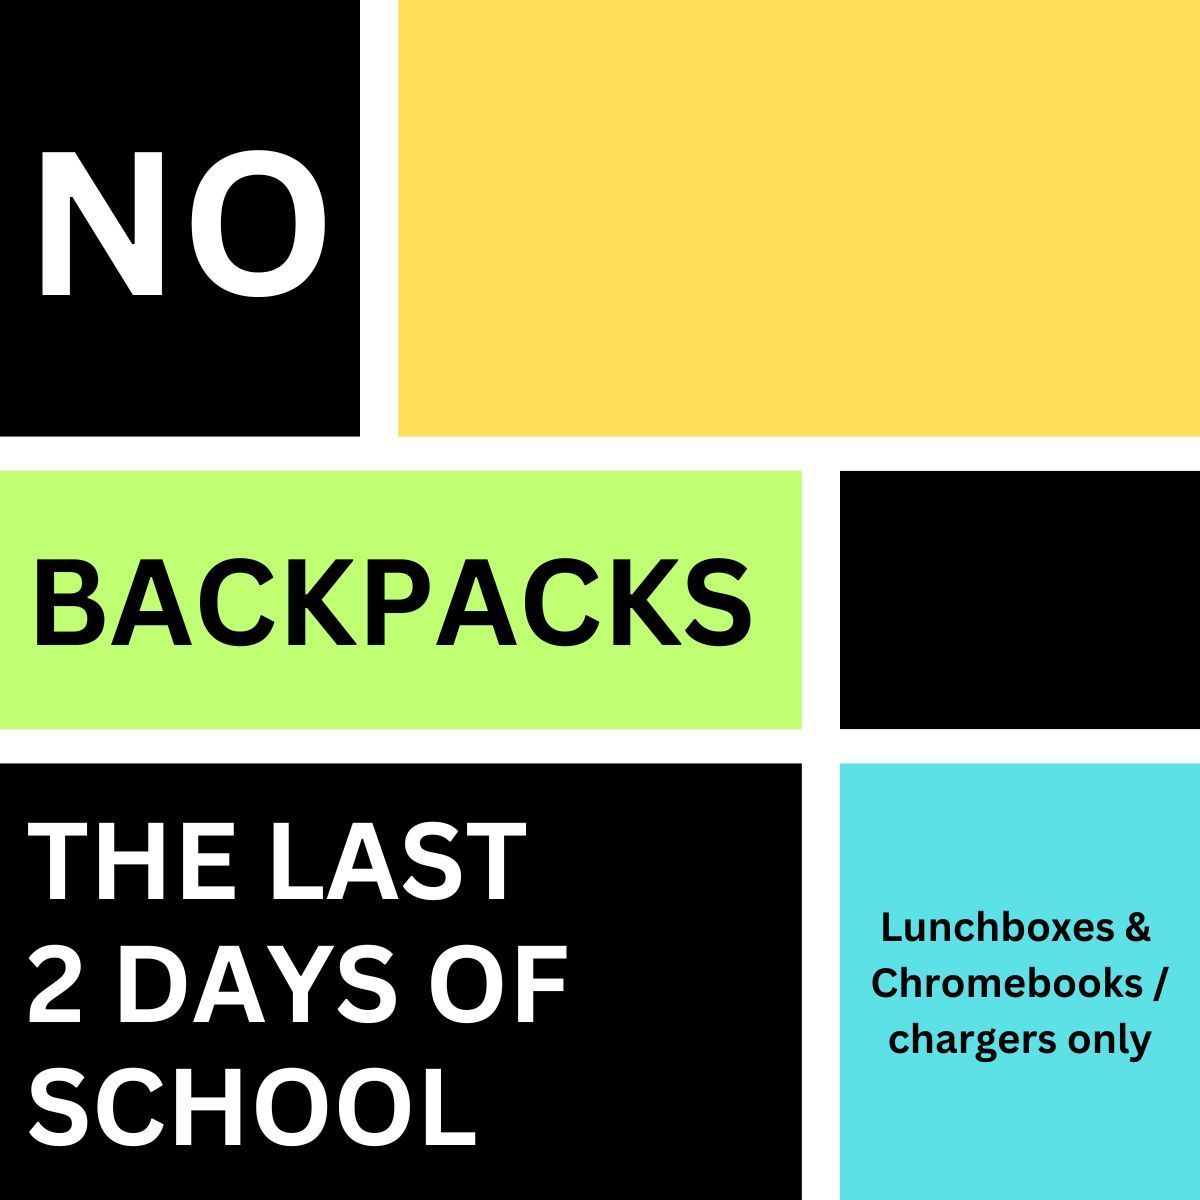 No backpacks will be allowed in school tomorrow or Wednesday. Lunchboxes and Chromebooks/Chromebook chargers are the only items allowed on campus on both days.